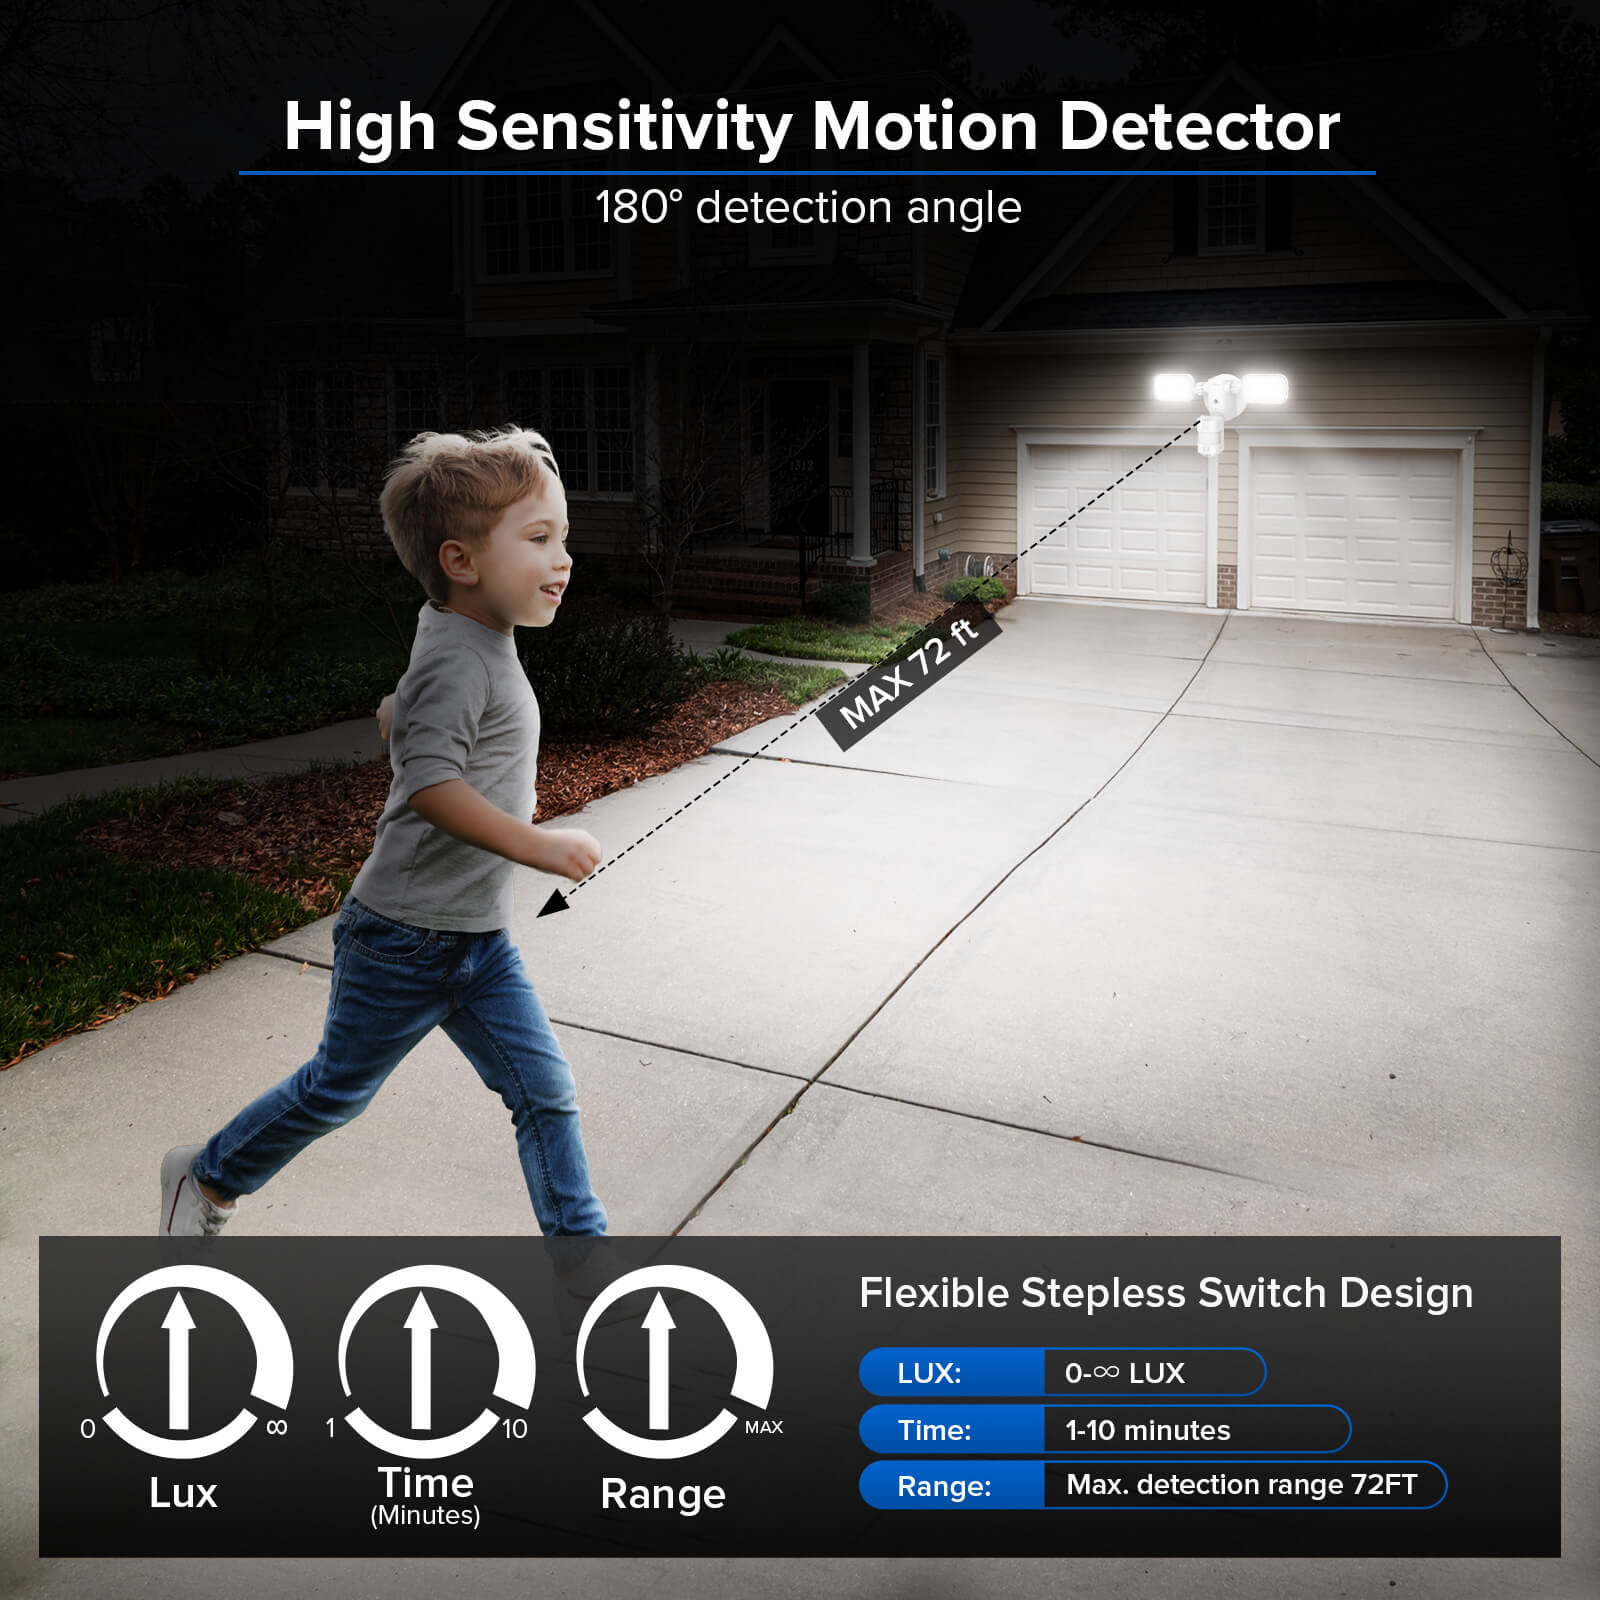 90W LED Security Light has 180° detection angle, high sensitivity motion detector